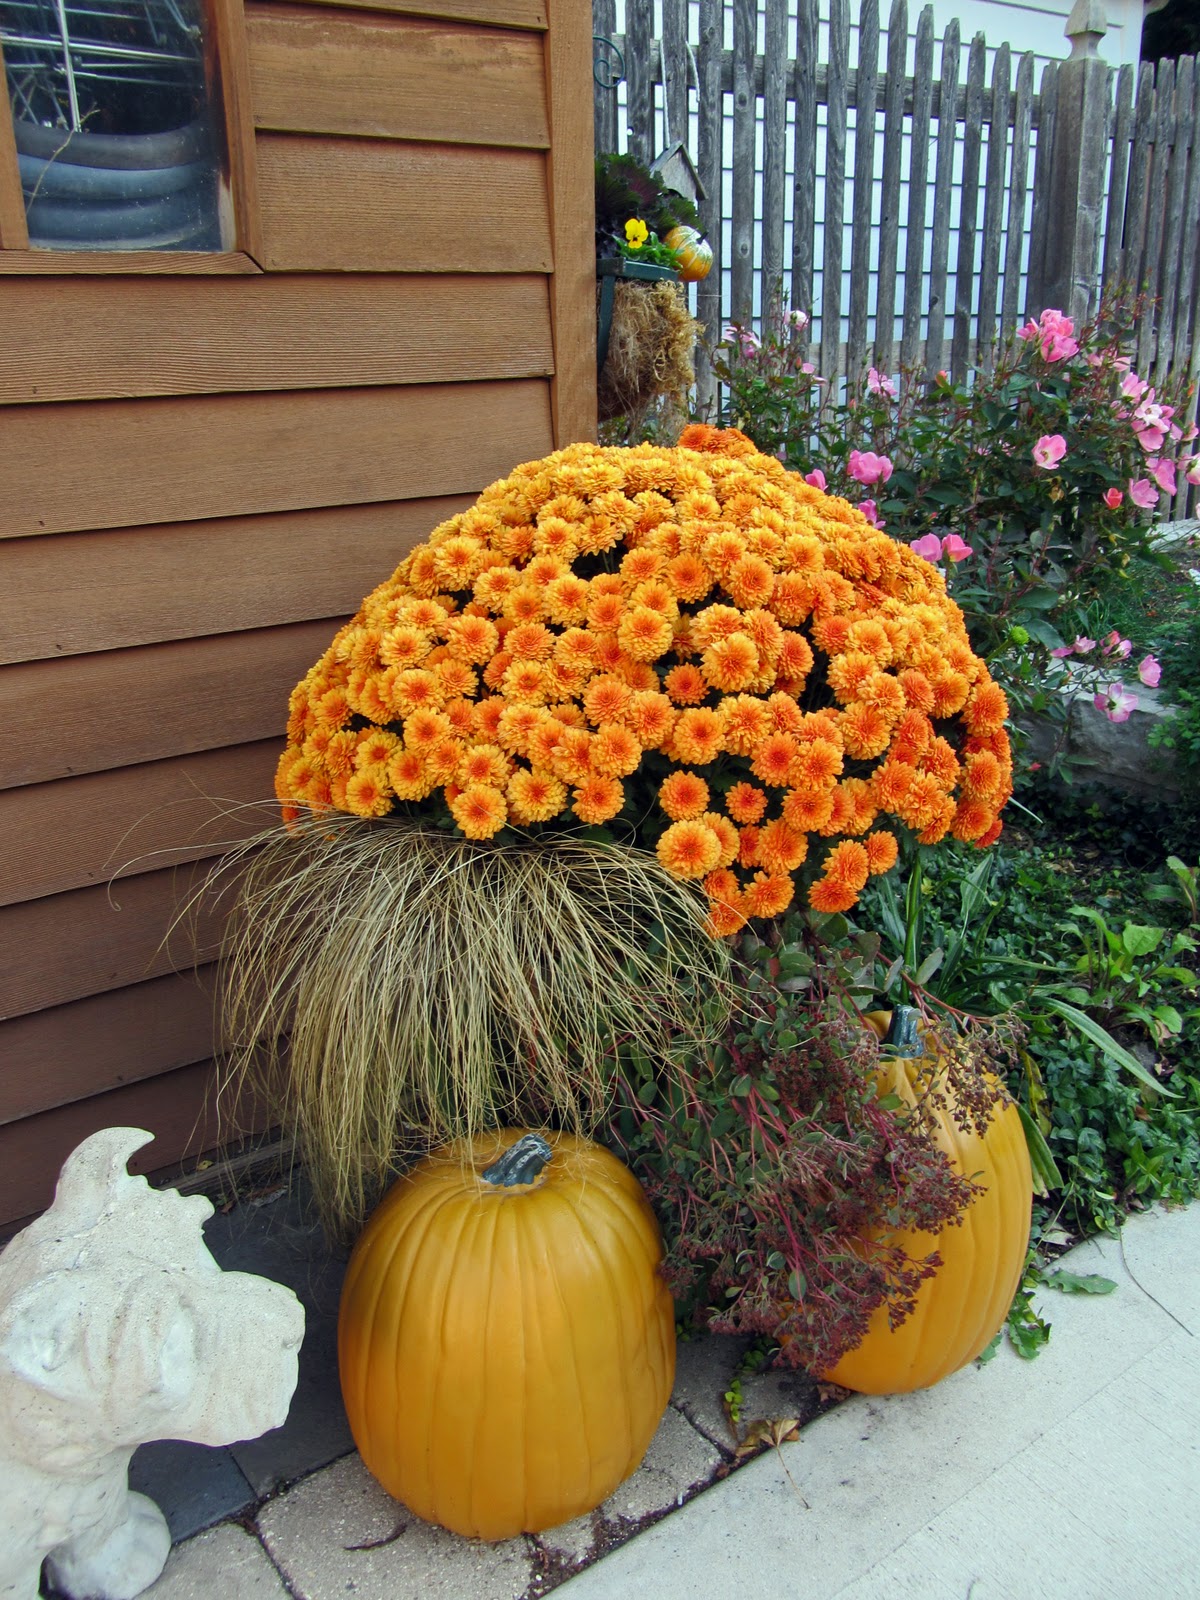 have to admit that Mums give that punch of color to the fall garden.